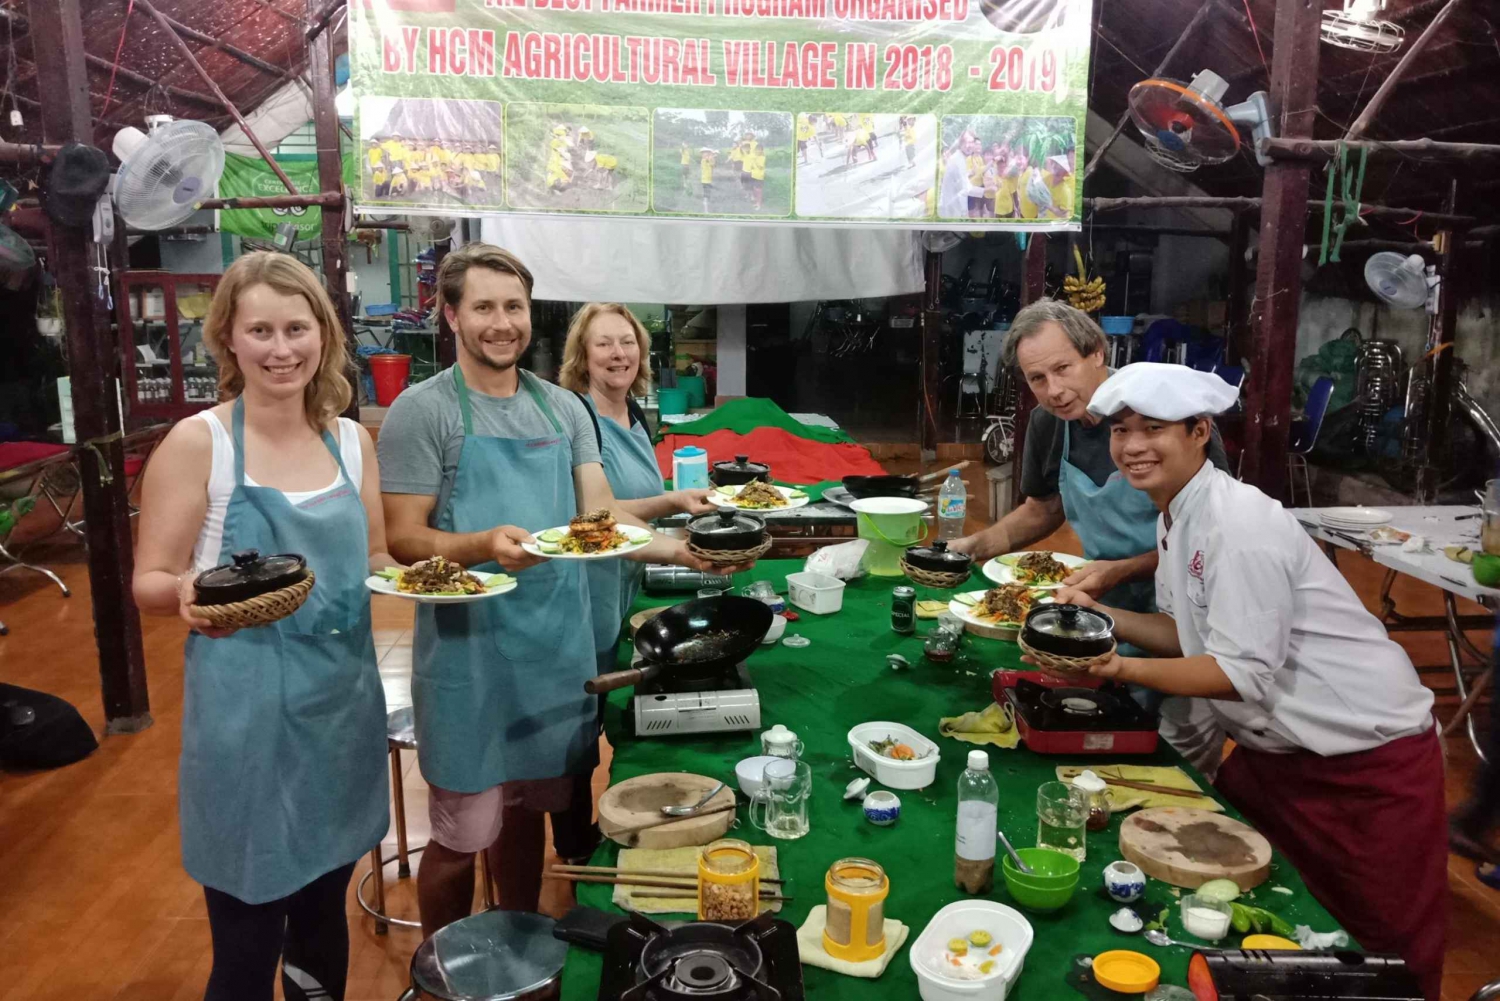 Full-Day Farming & Cooking class at Agricultural Village